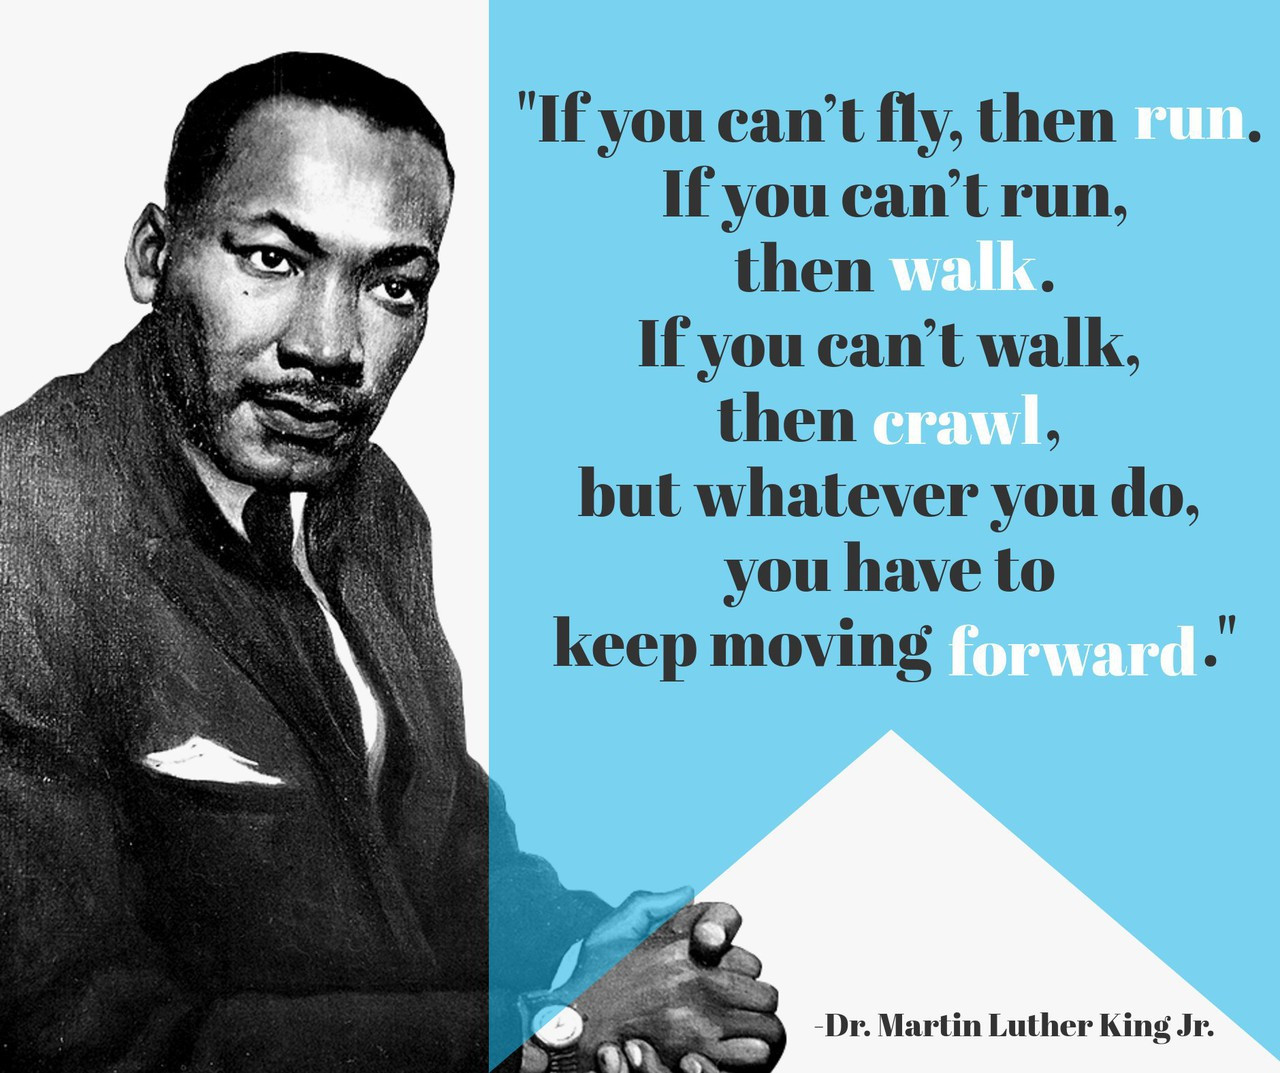 Mlk Quotes Leadership
 10 Inspirational Leadership Quotes by Martin Luther King Jr